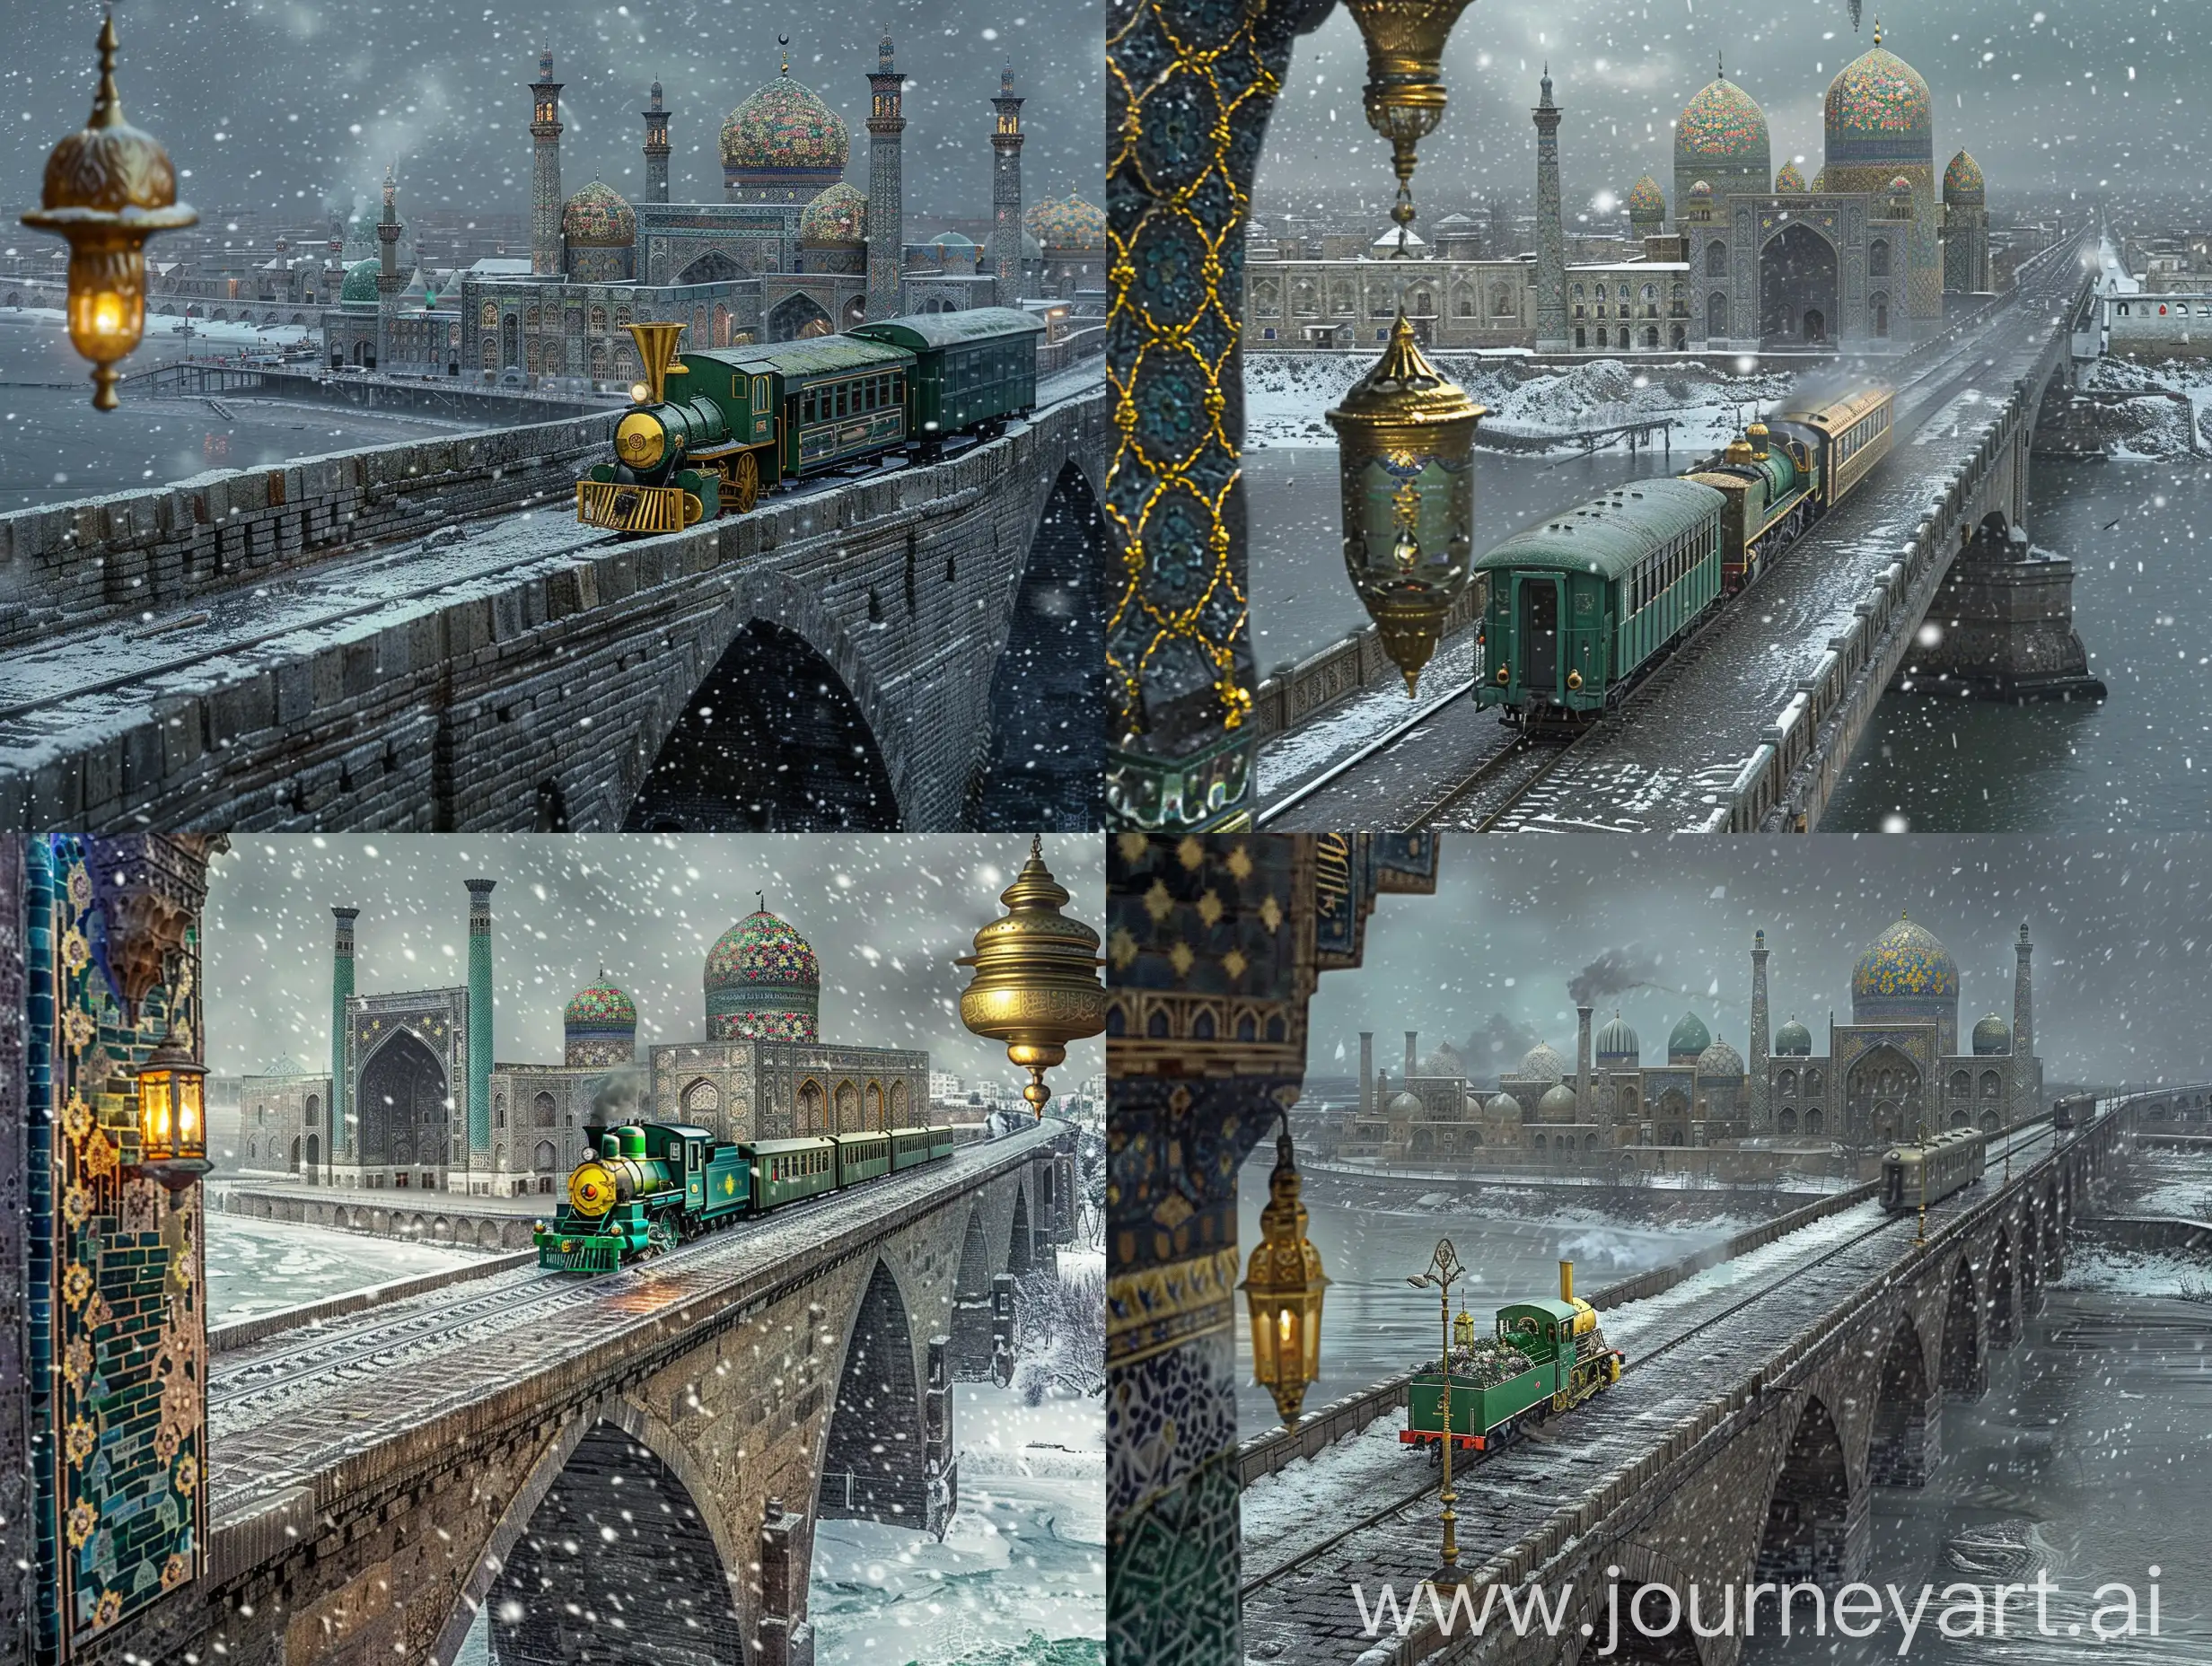 Glorious-Islamic-Architecture-Majestic-Stonebridge-and-Steam-Engine-Train-in-Floral-Persian-Tiled-City